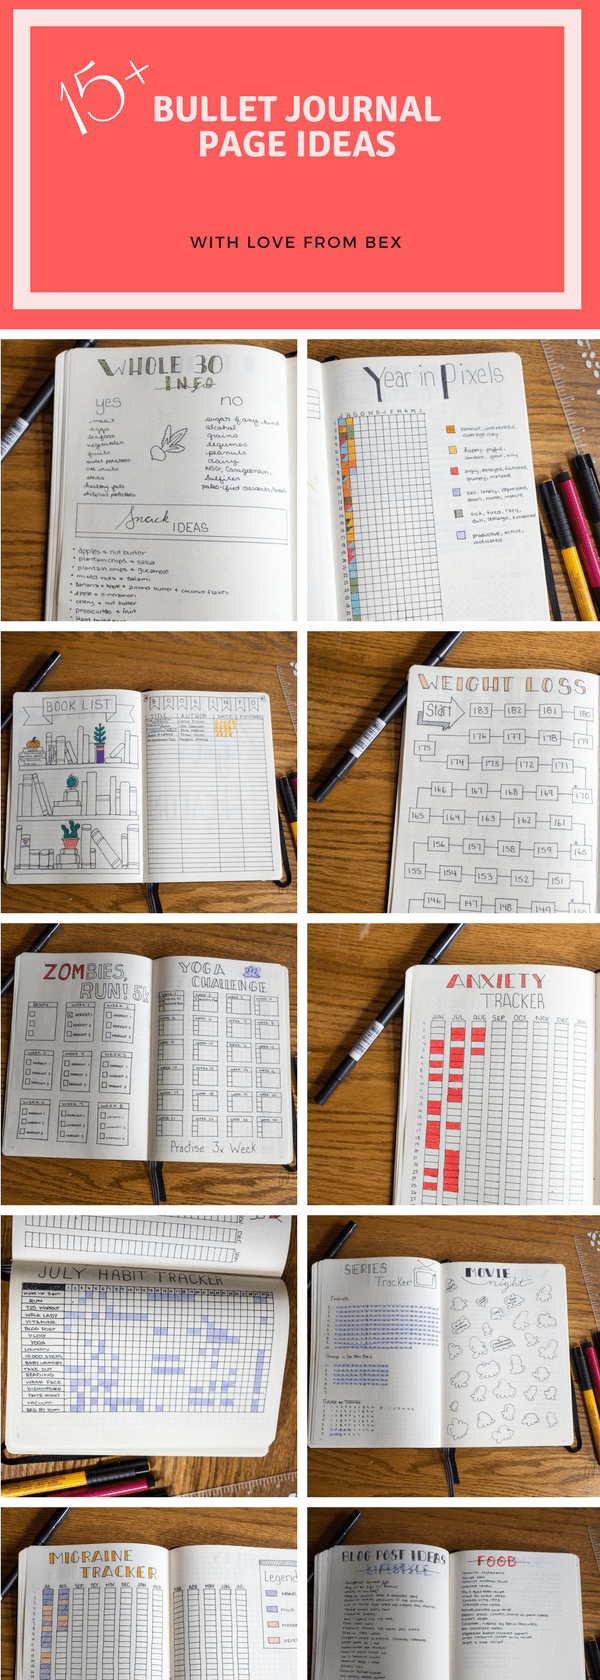 How To Bullet Journal for Mental Health: 19 Page Ideas